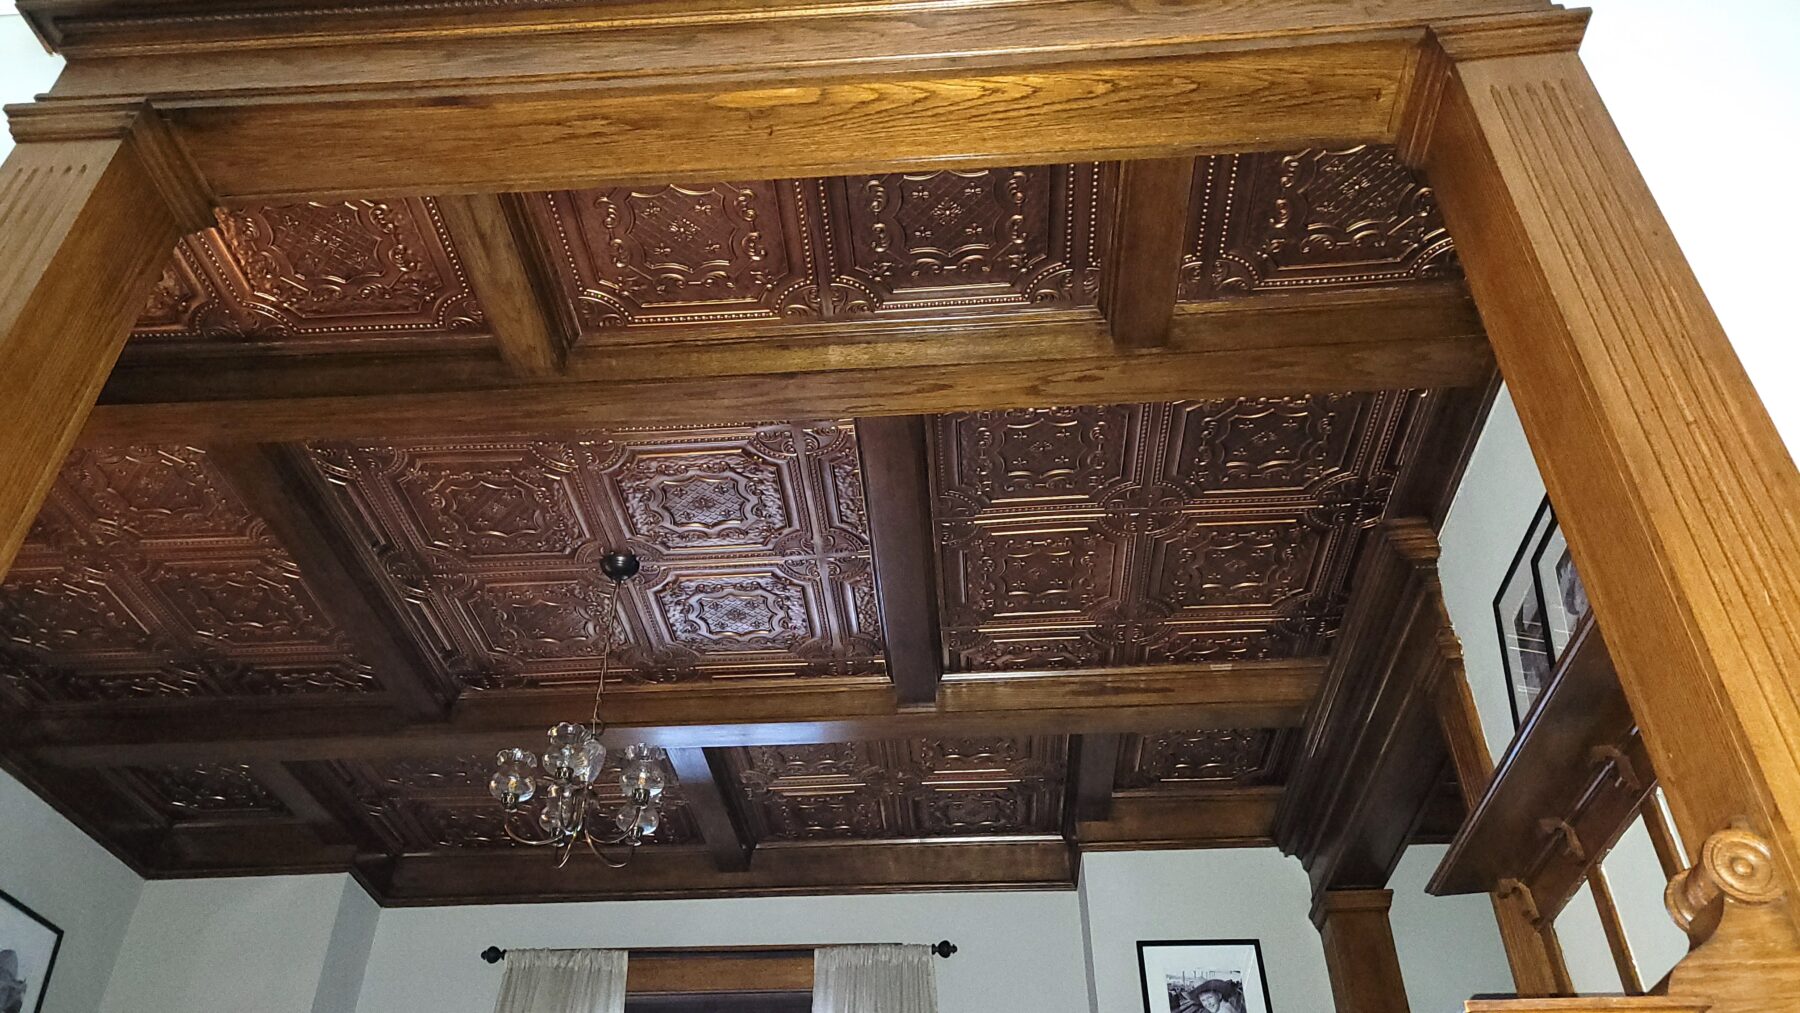 exquisite dining room ceiling in howell michigan 1890 built home